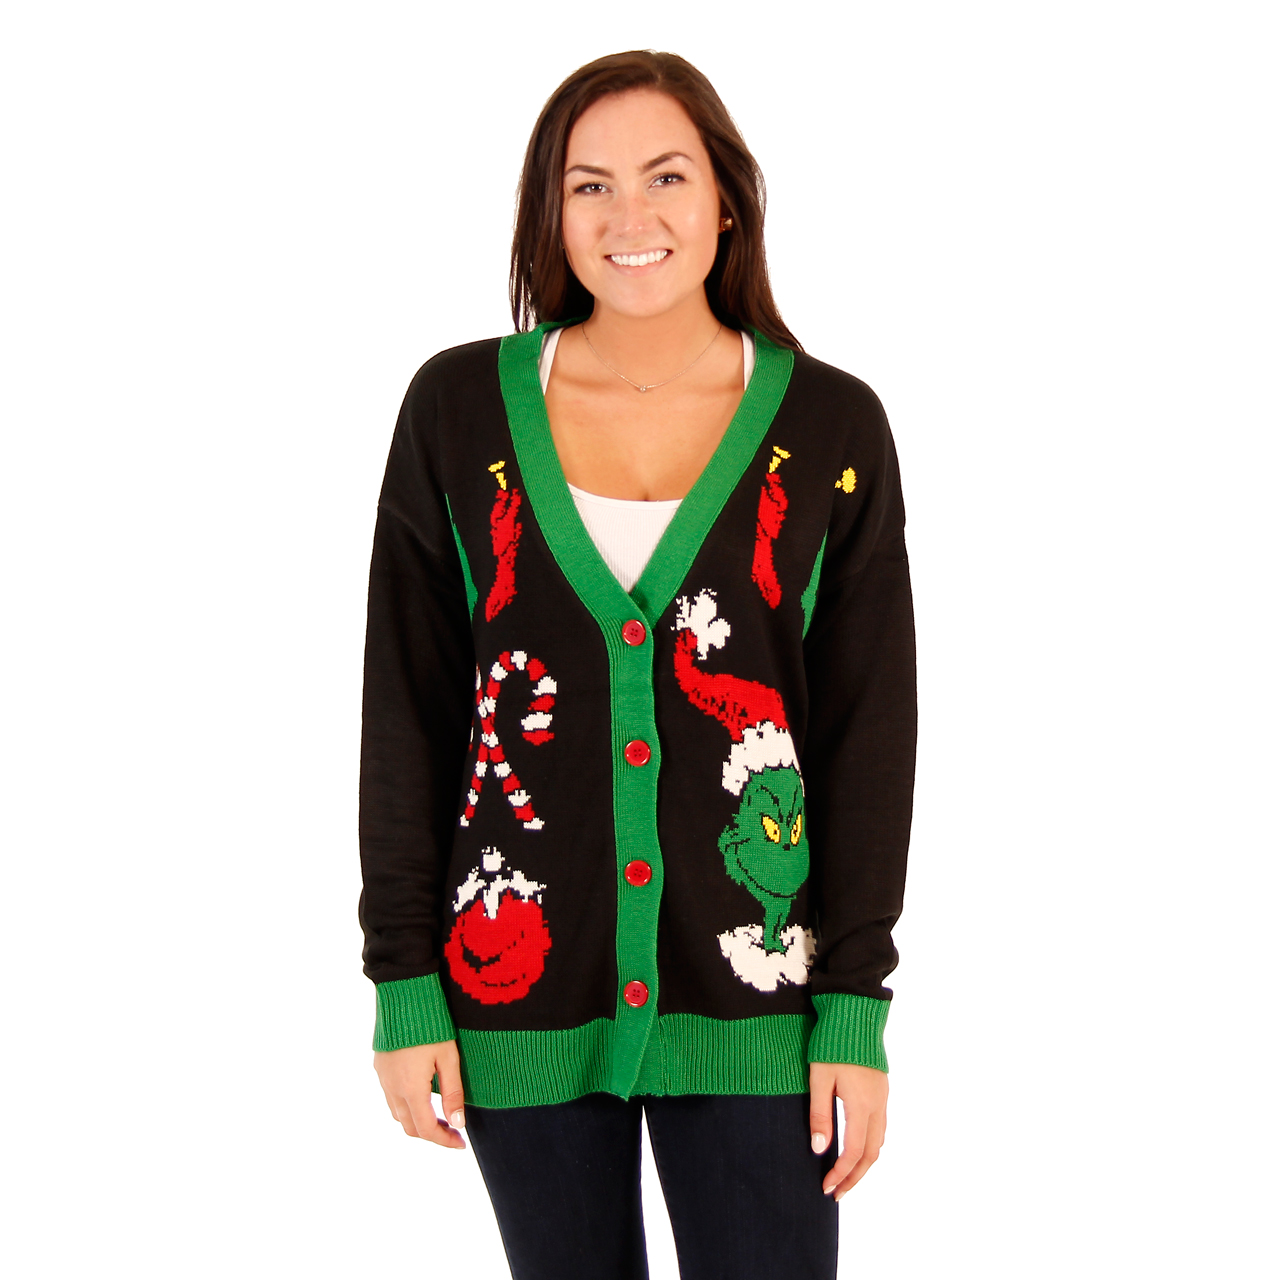 Women’s The Grinch Ugly Christmas Cardigan Sweater